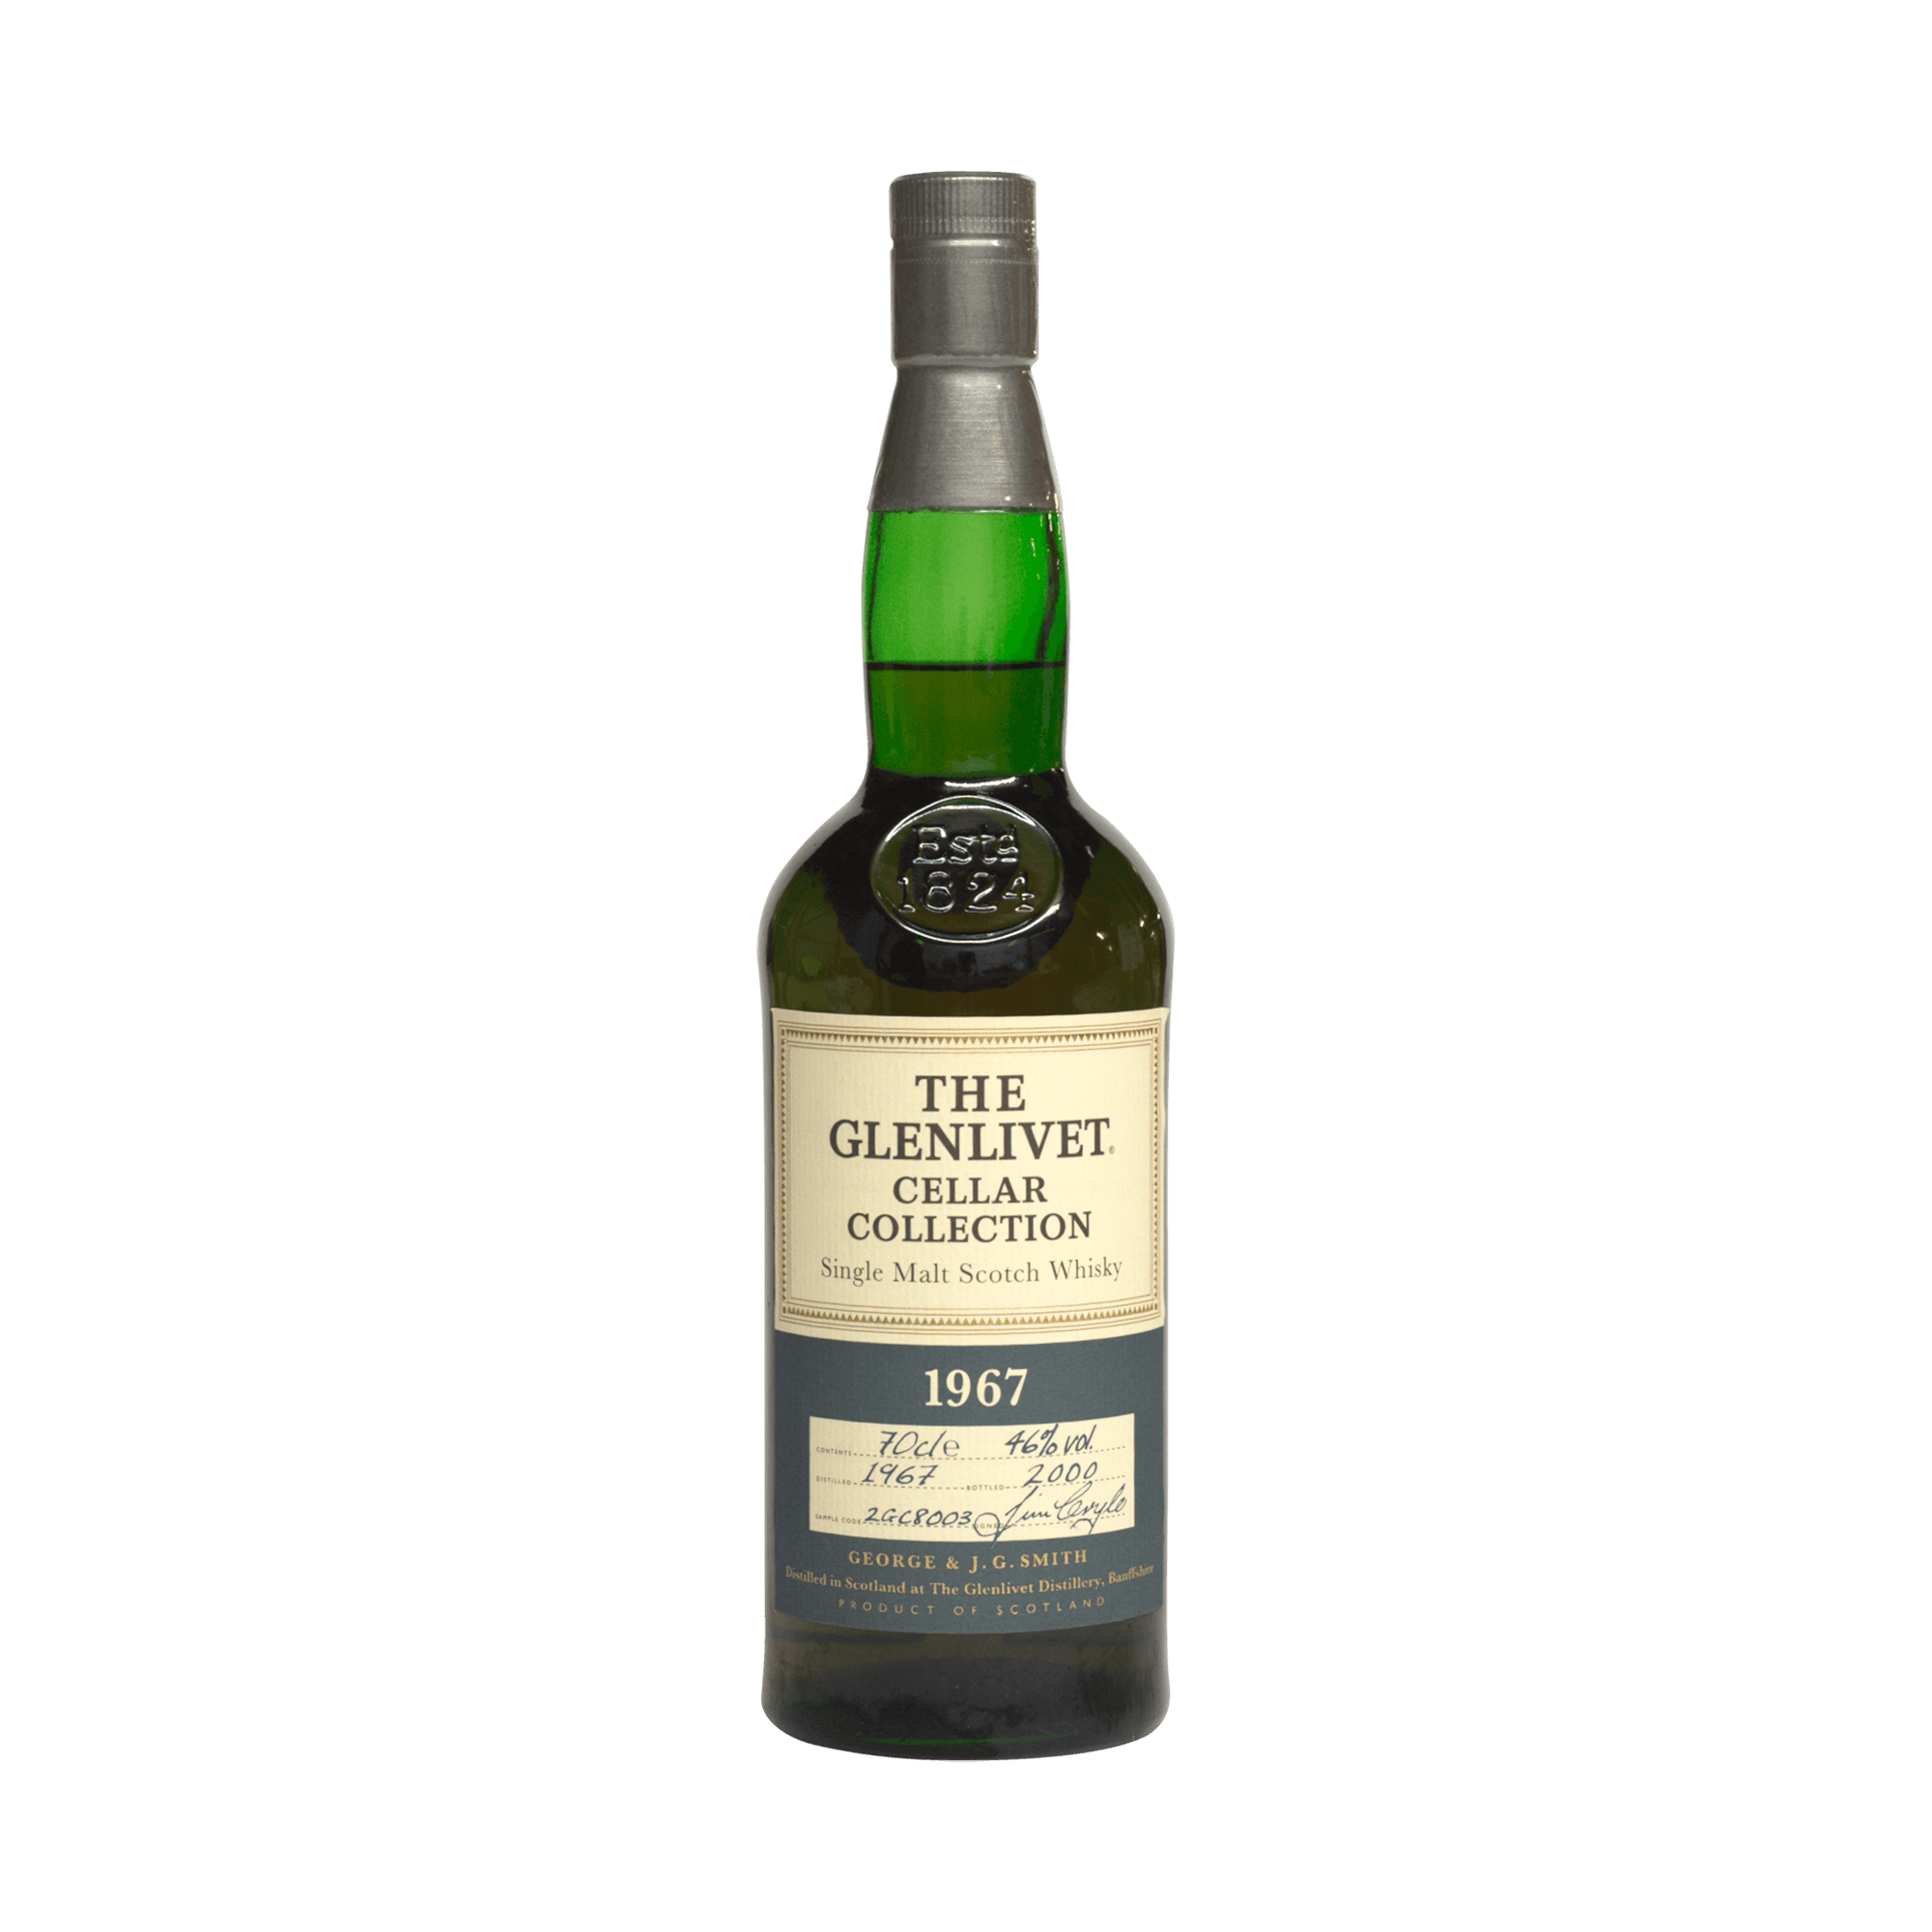 Glenlivet 1967 33 Year Old 'The Cellar Collection' George & JG Smith 46.00%